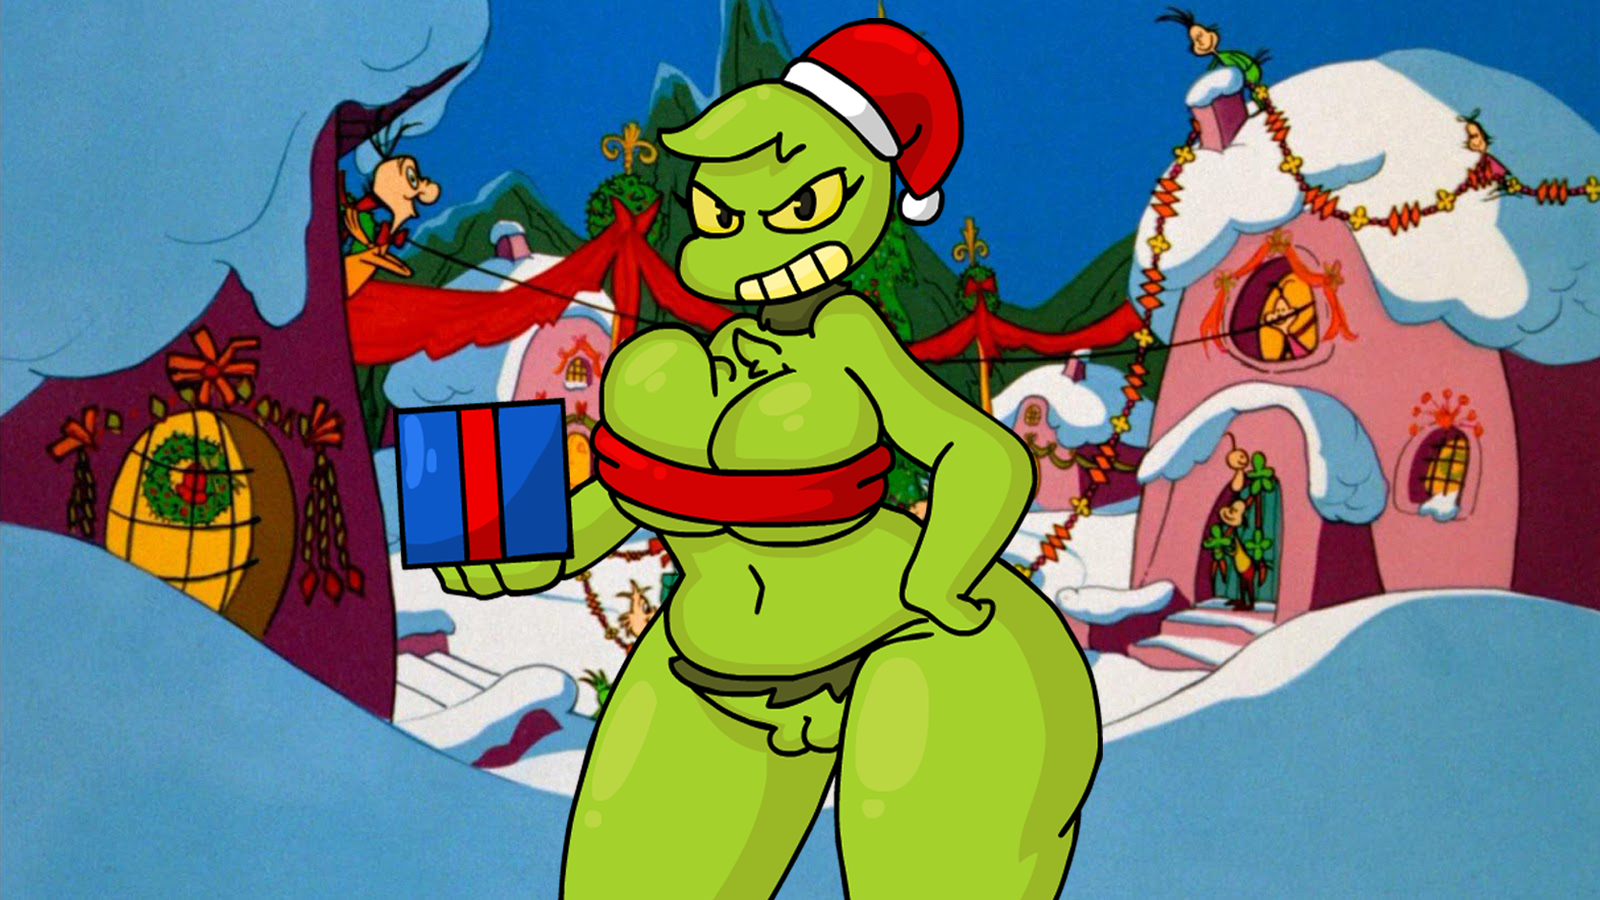 Pepe The Grinch nude pic, sex photos Pepe The Grinch, detnox e.